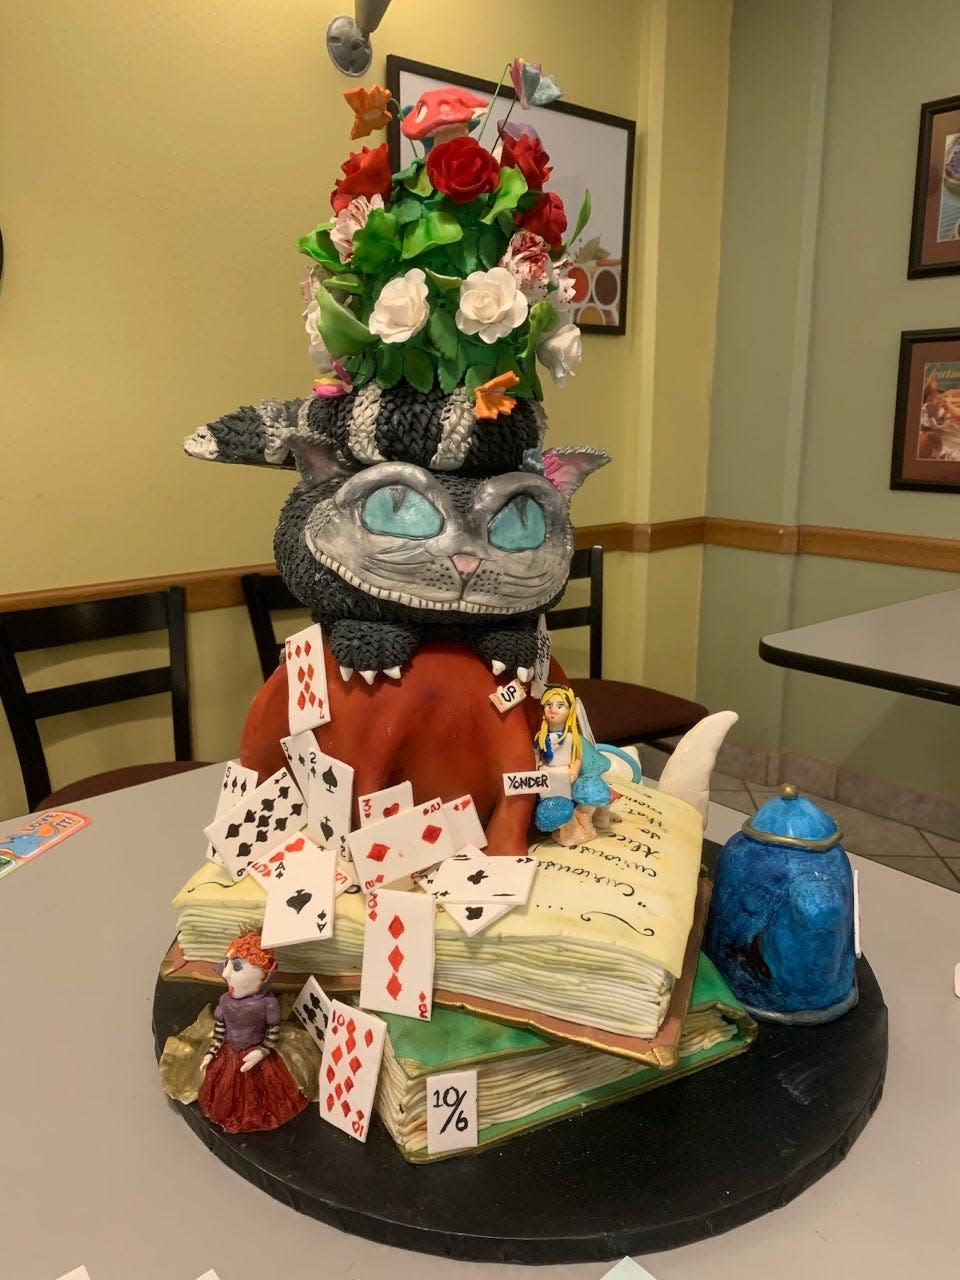 An "Alice in Wonderland" cake created by Doña Ana Community College Chefs Cecilia Castro and Jen Hart for the Edible Storybook Contest entry held April 9, 2022 at New Mexico State University.